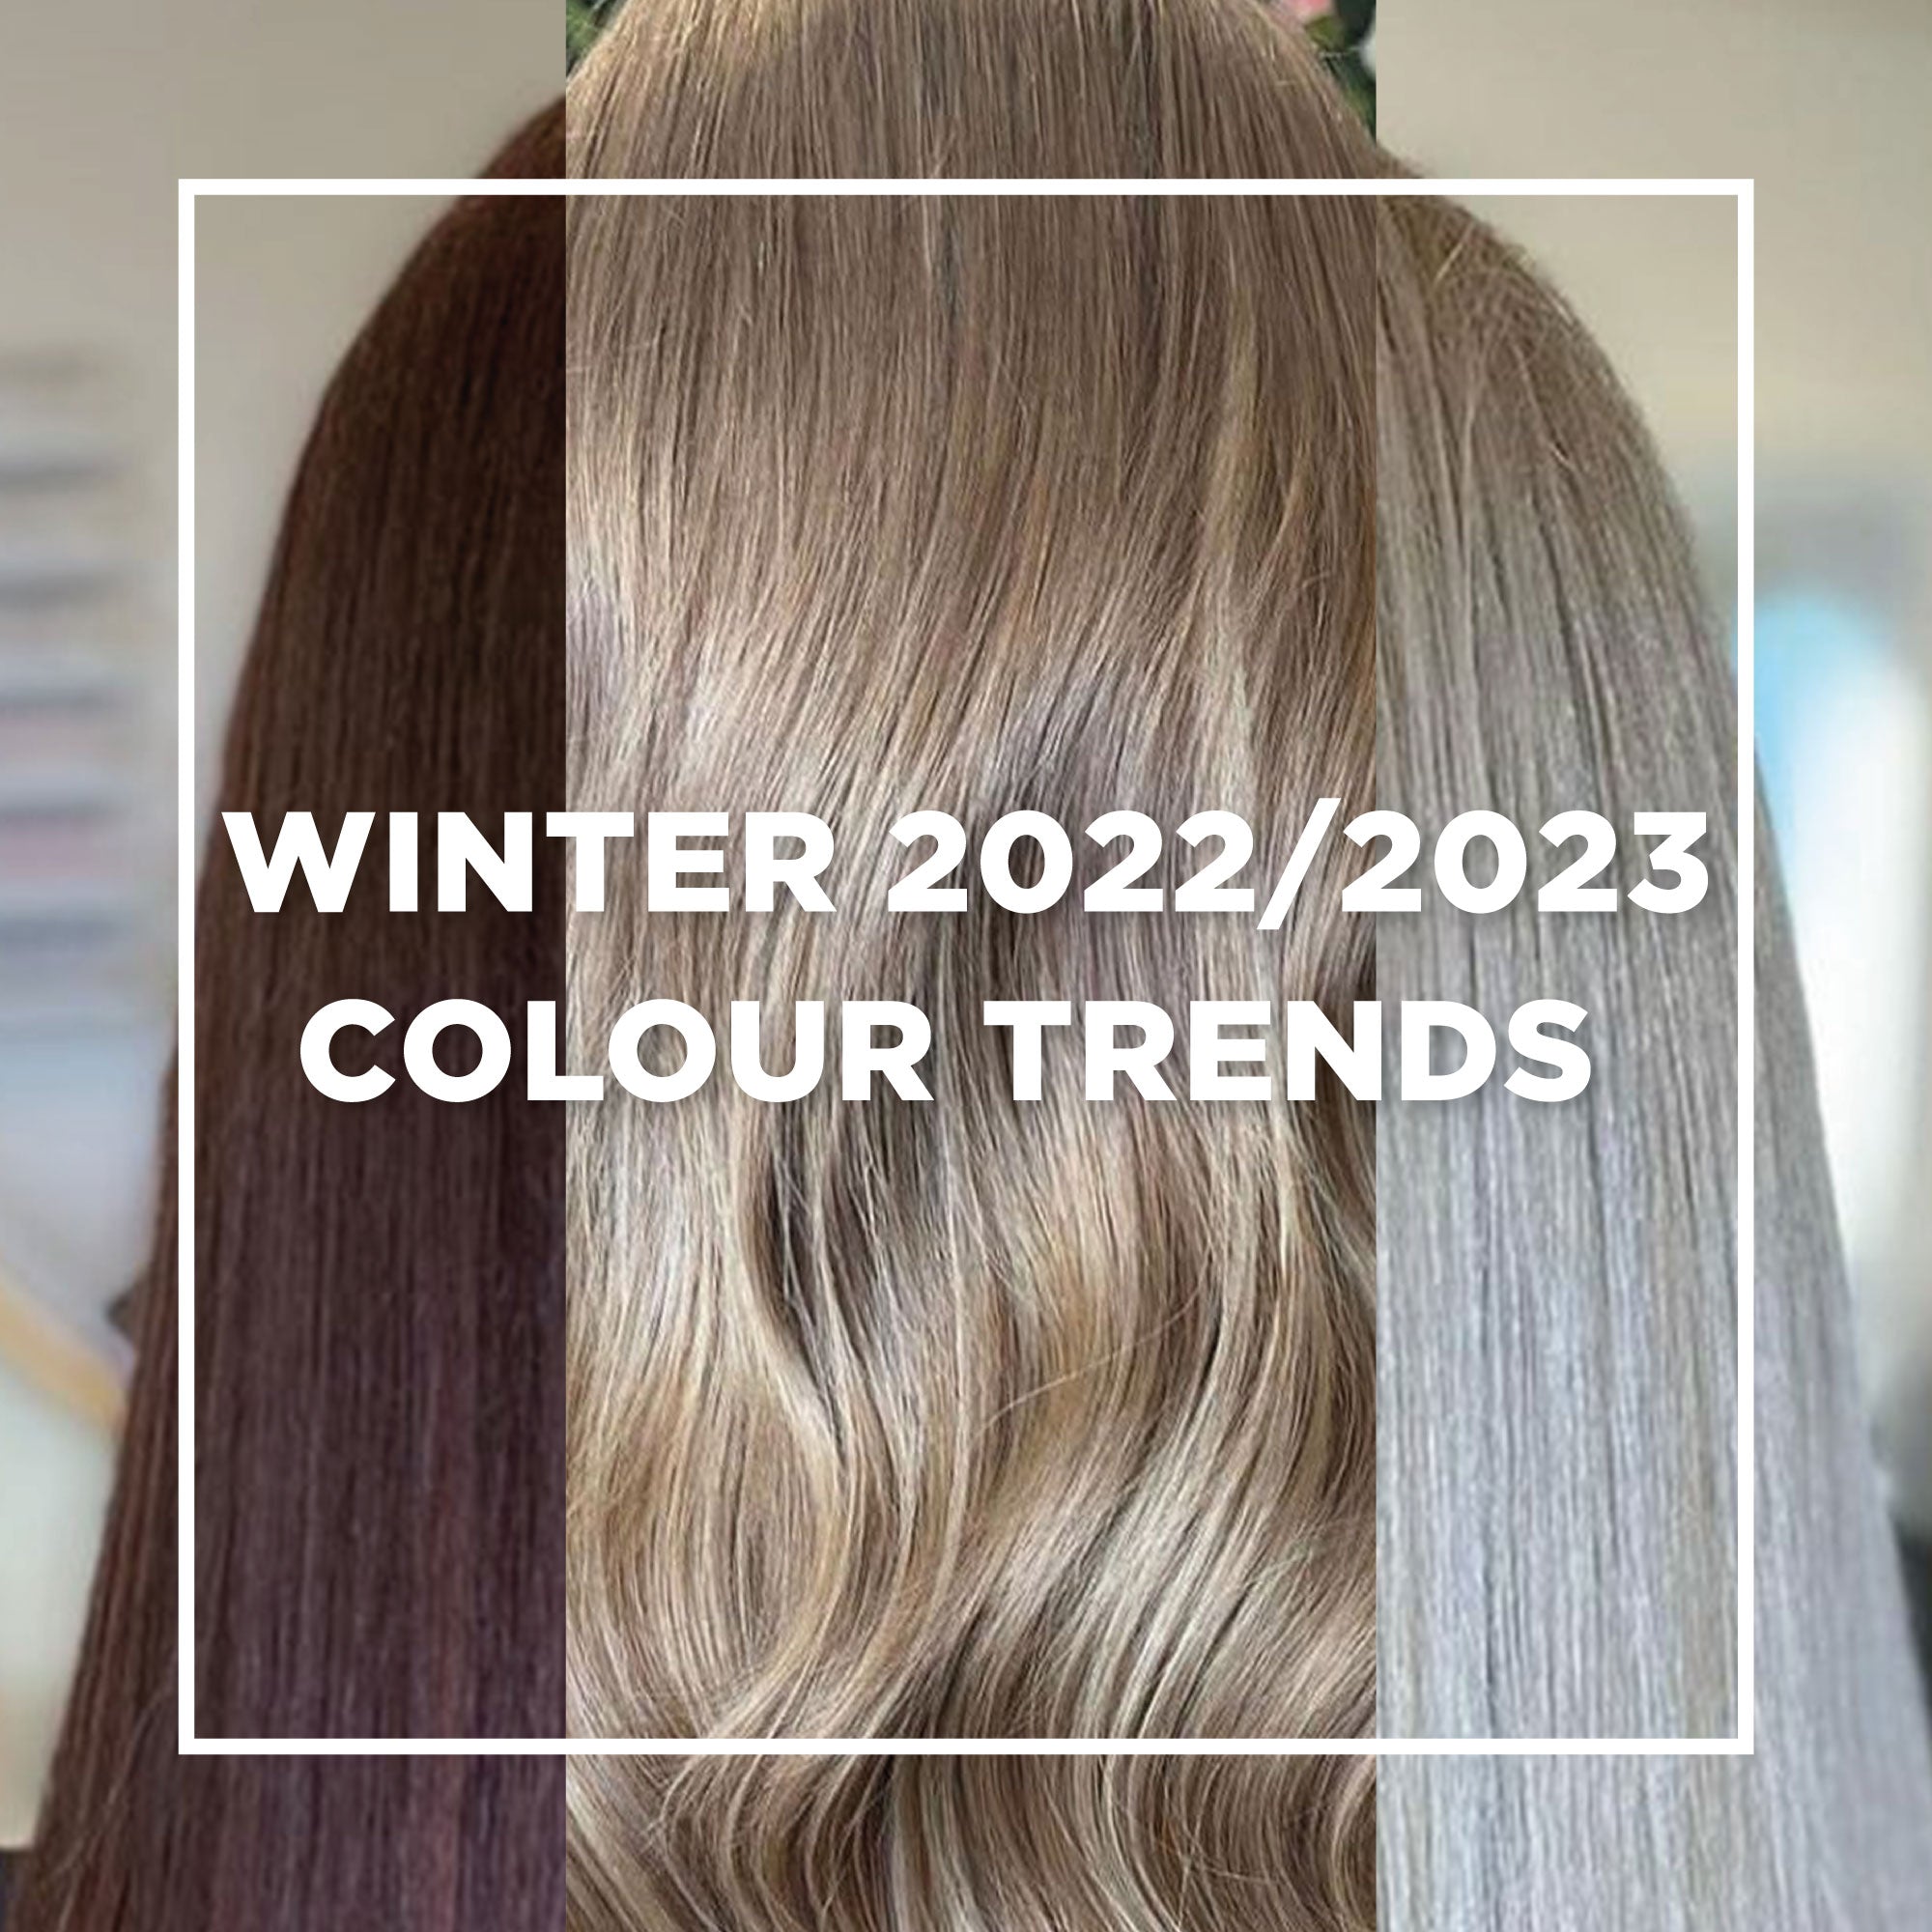 Hair Colours We Expect To Trend In Winter 2022/2023 – Remi Cachet